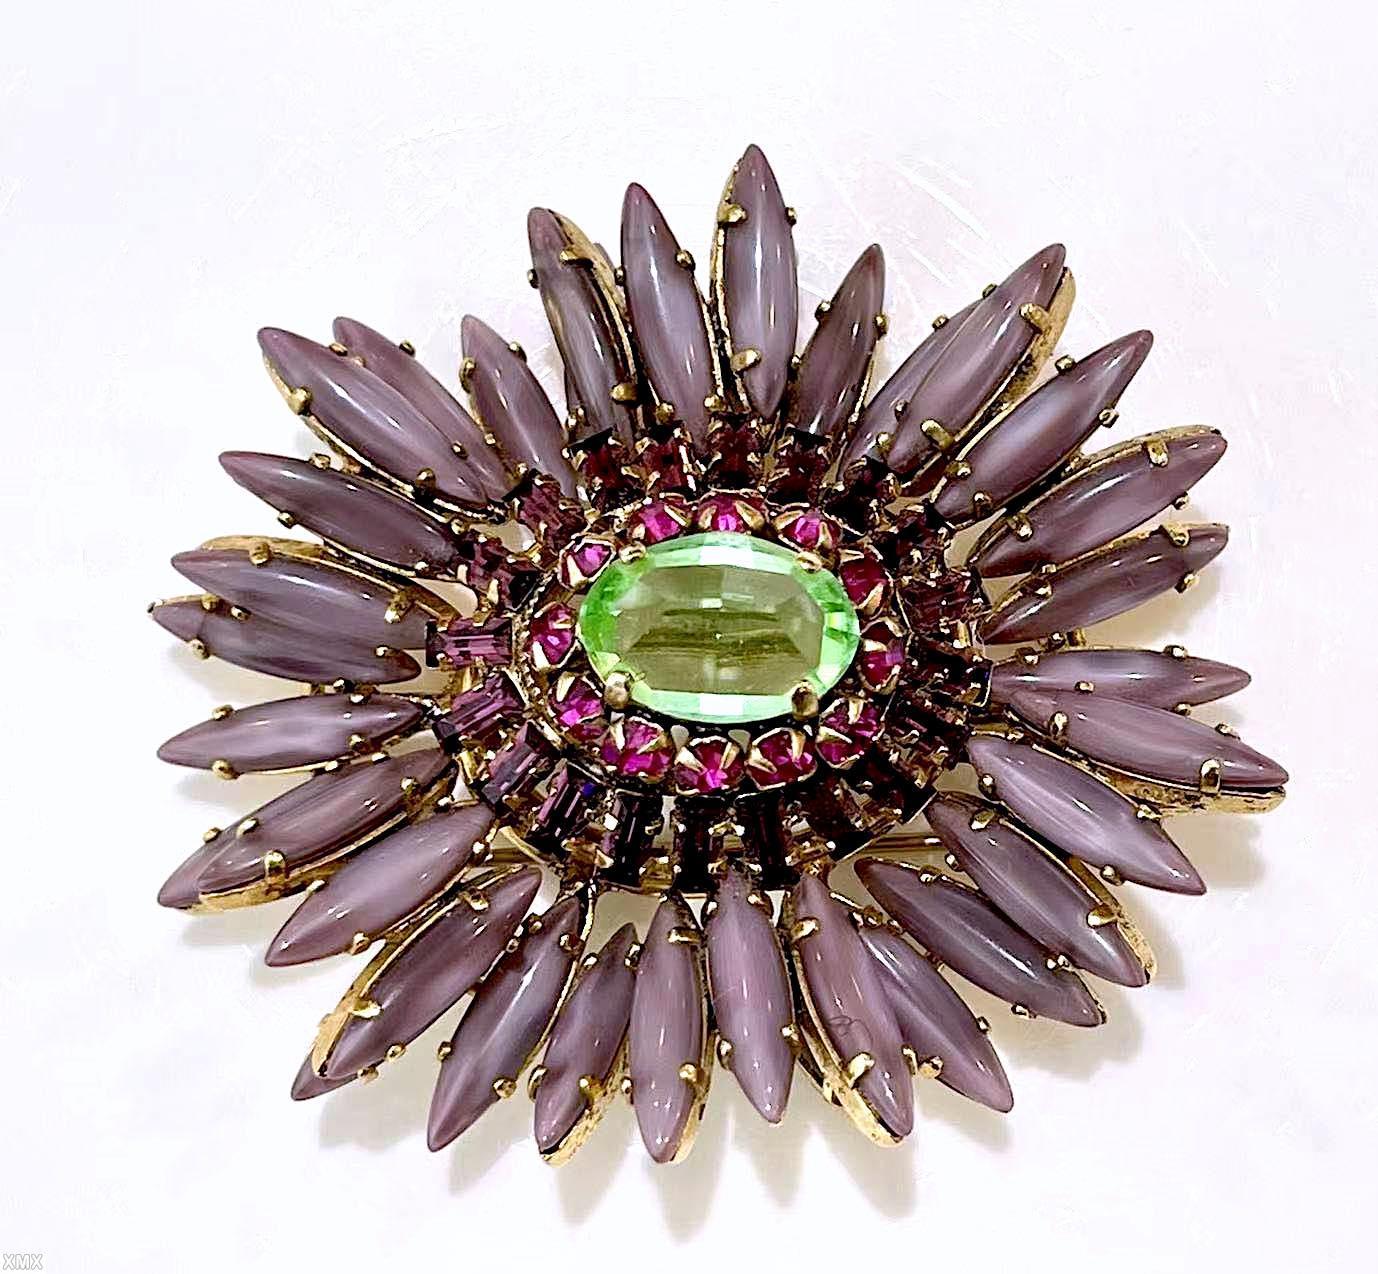 Schreiner navette ruffle pin hook eye domed oval center 2 rounds surrounding stone opaque lavender navette clear apple green faceted large oval center stone fuchsia small inverted stone purple small baguette goldtone jewelry